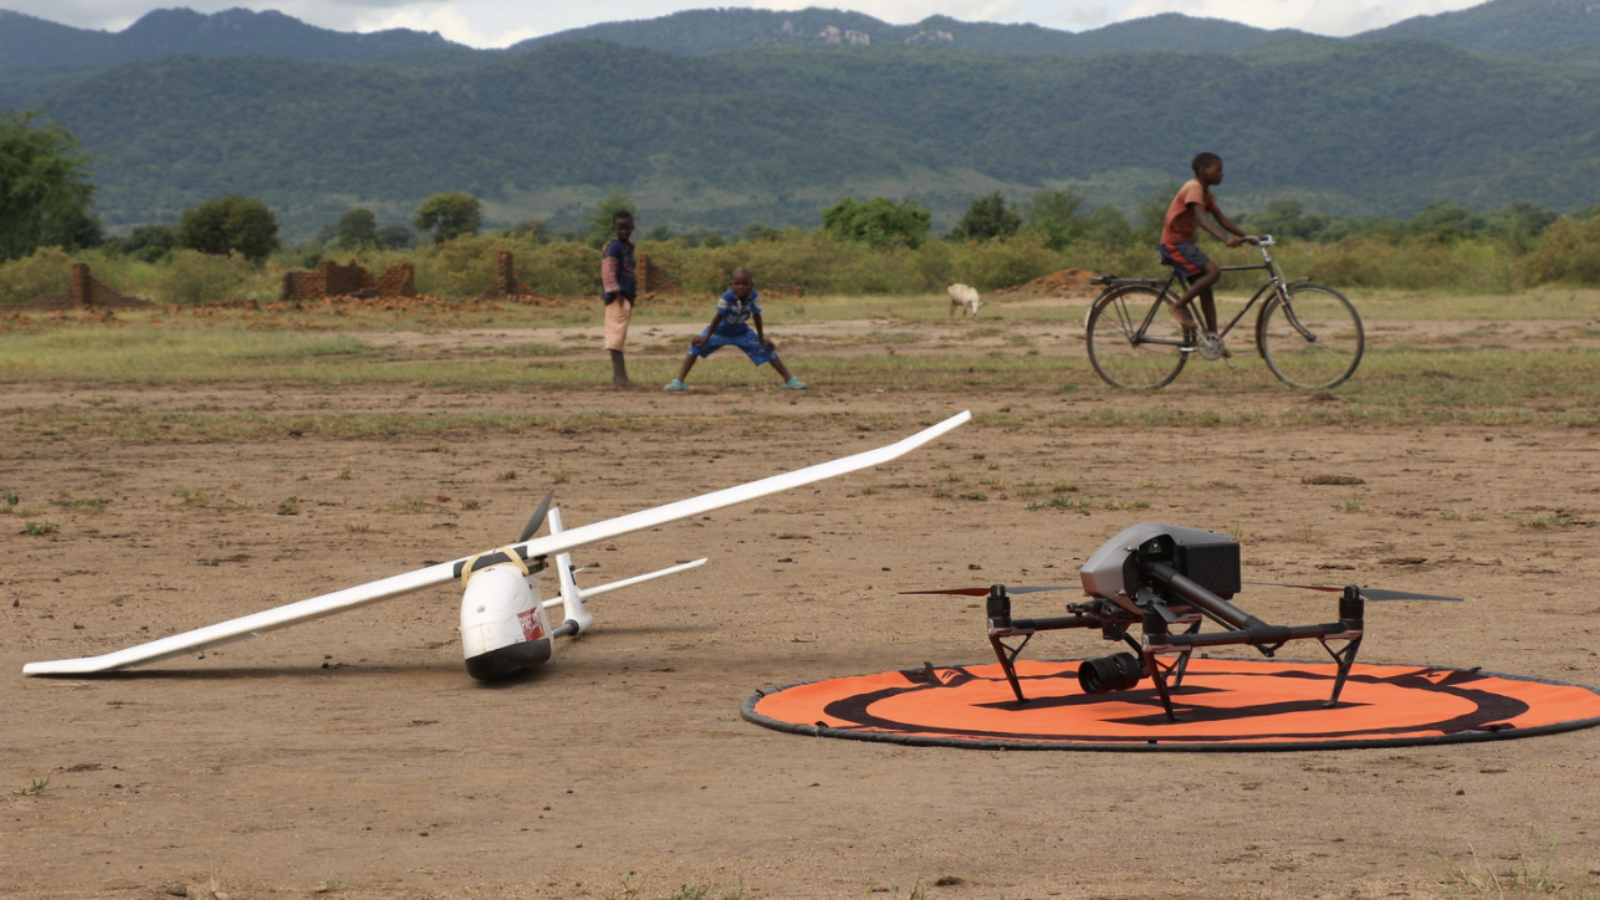 Two small drones sit rest on the dirt against the backdrop of mountains.